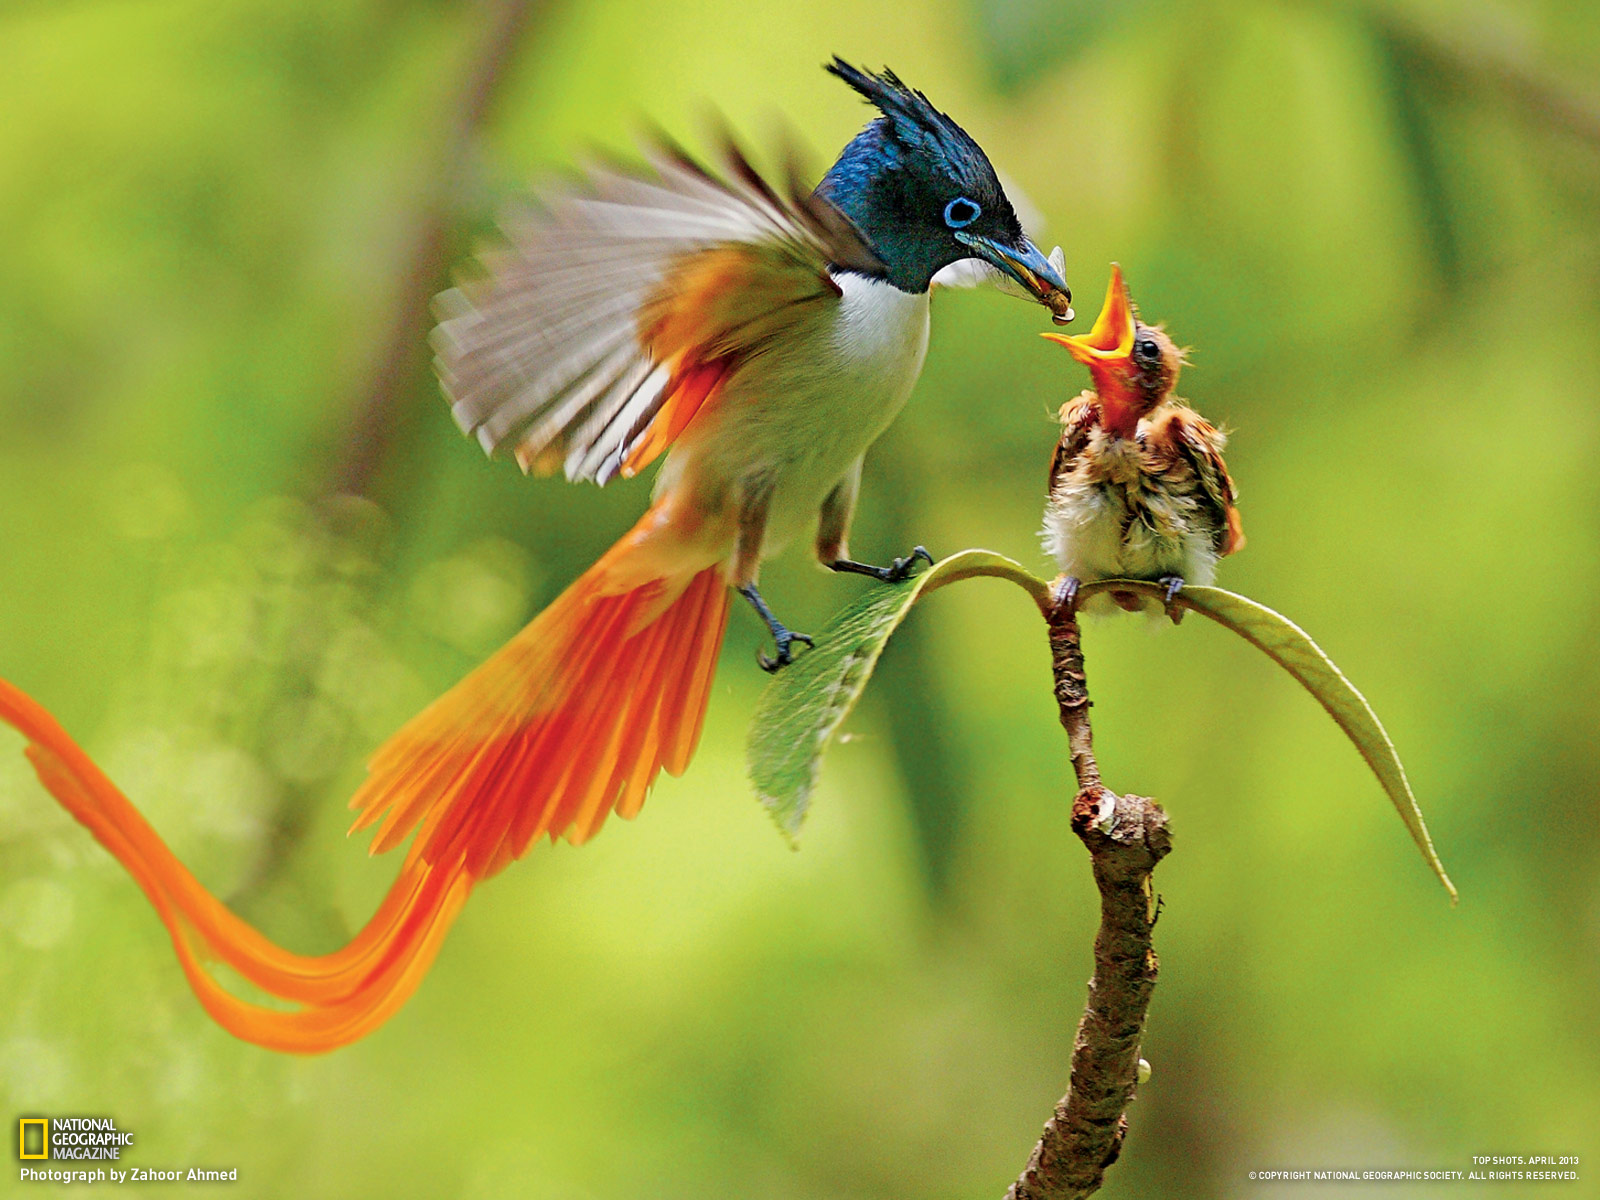 Charming Birds Of Paradise Pictures